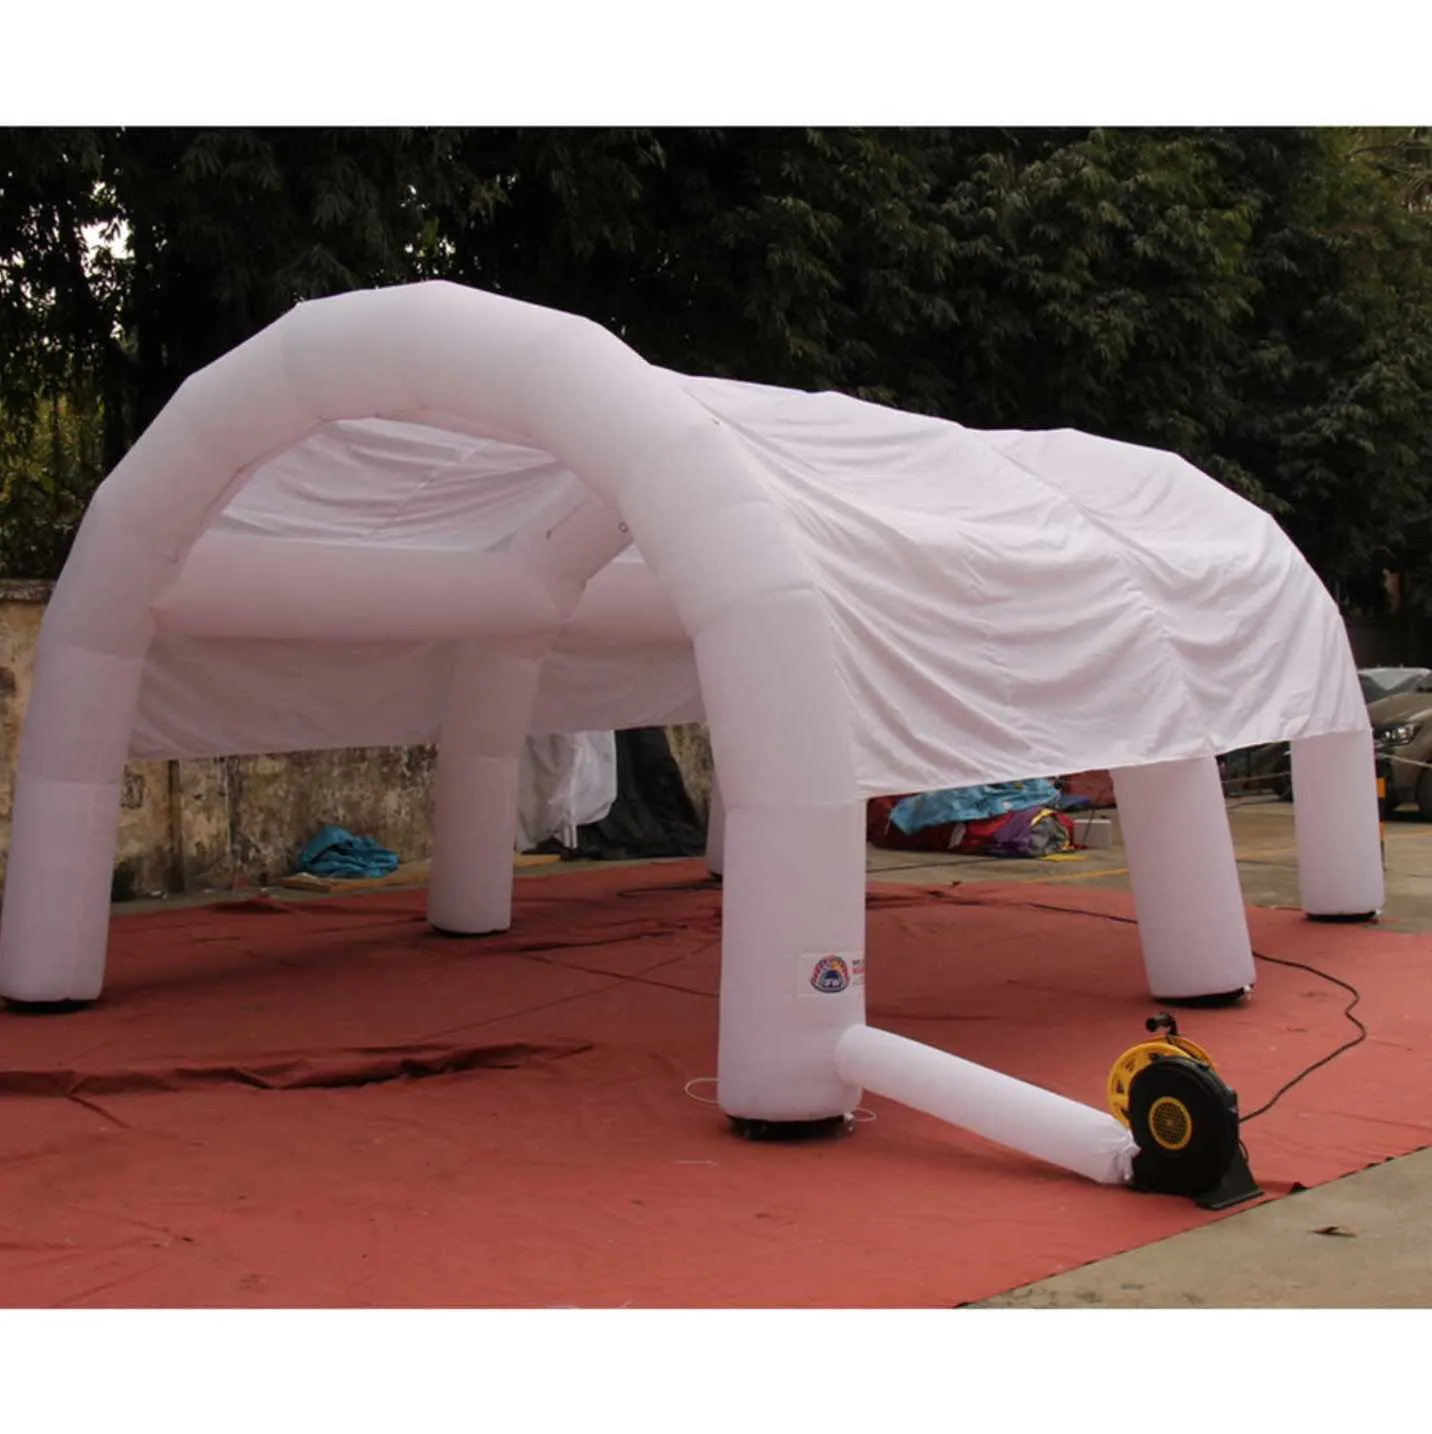 8mx5mx4mh Made mobile blow up inflatable tent with LED light waterproof dome arch tents canopy for outdoor parties or events